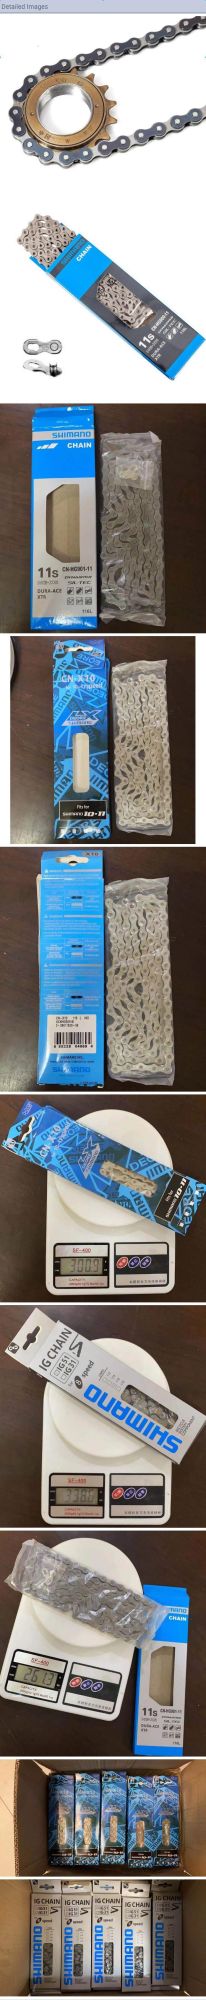 Ctory Price Shimano Bicycle Chain 108/110 Links 8/9/10/11/12 Speed Bicycle Chain MTB Mountain Other Bicycle Parts Chains